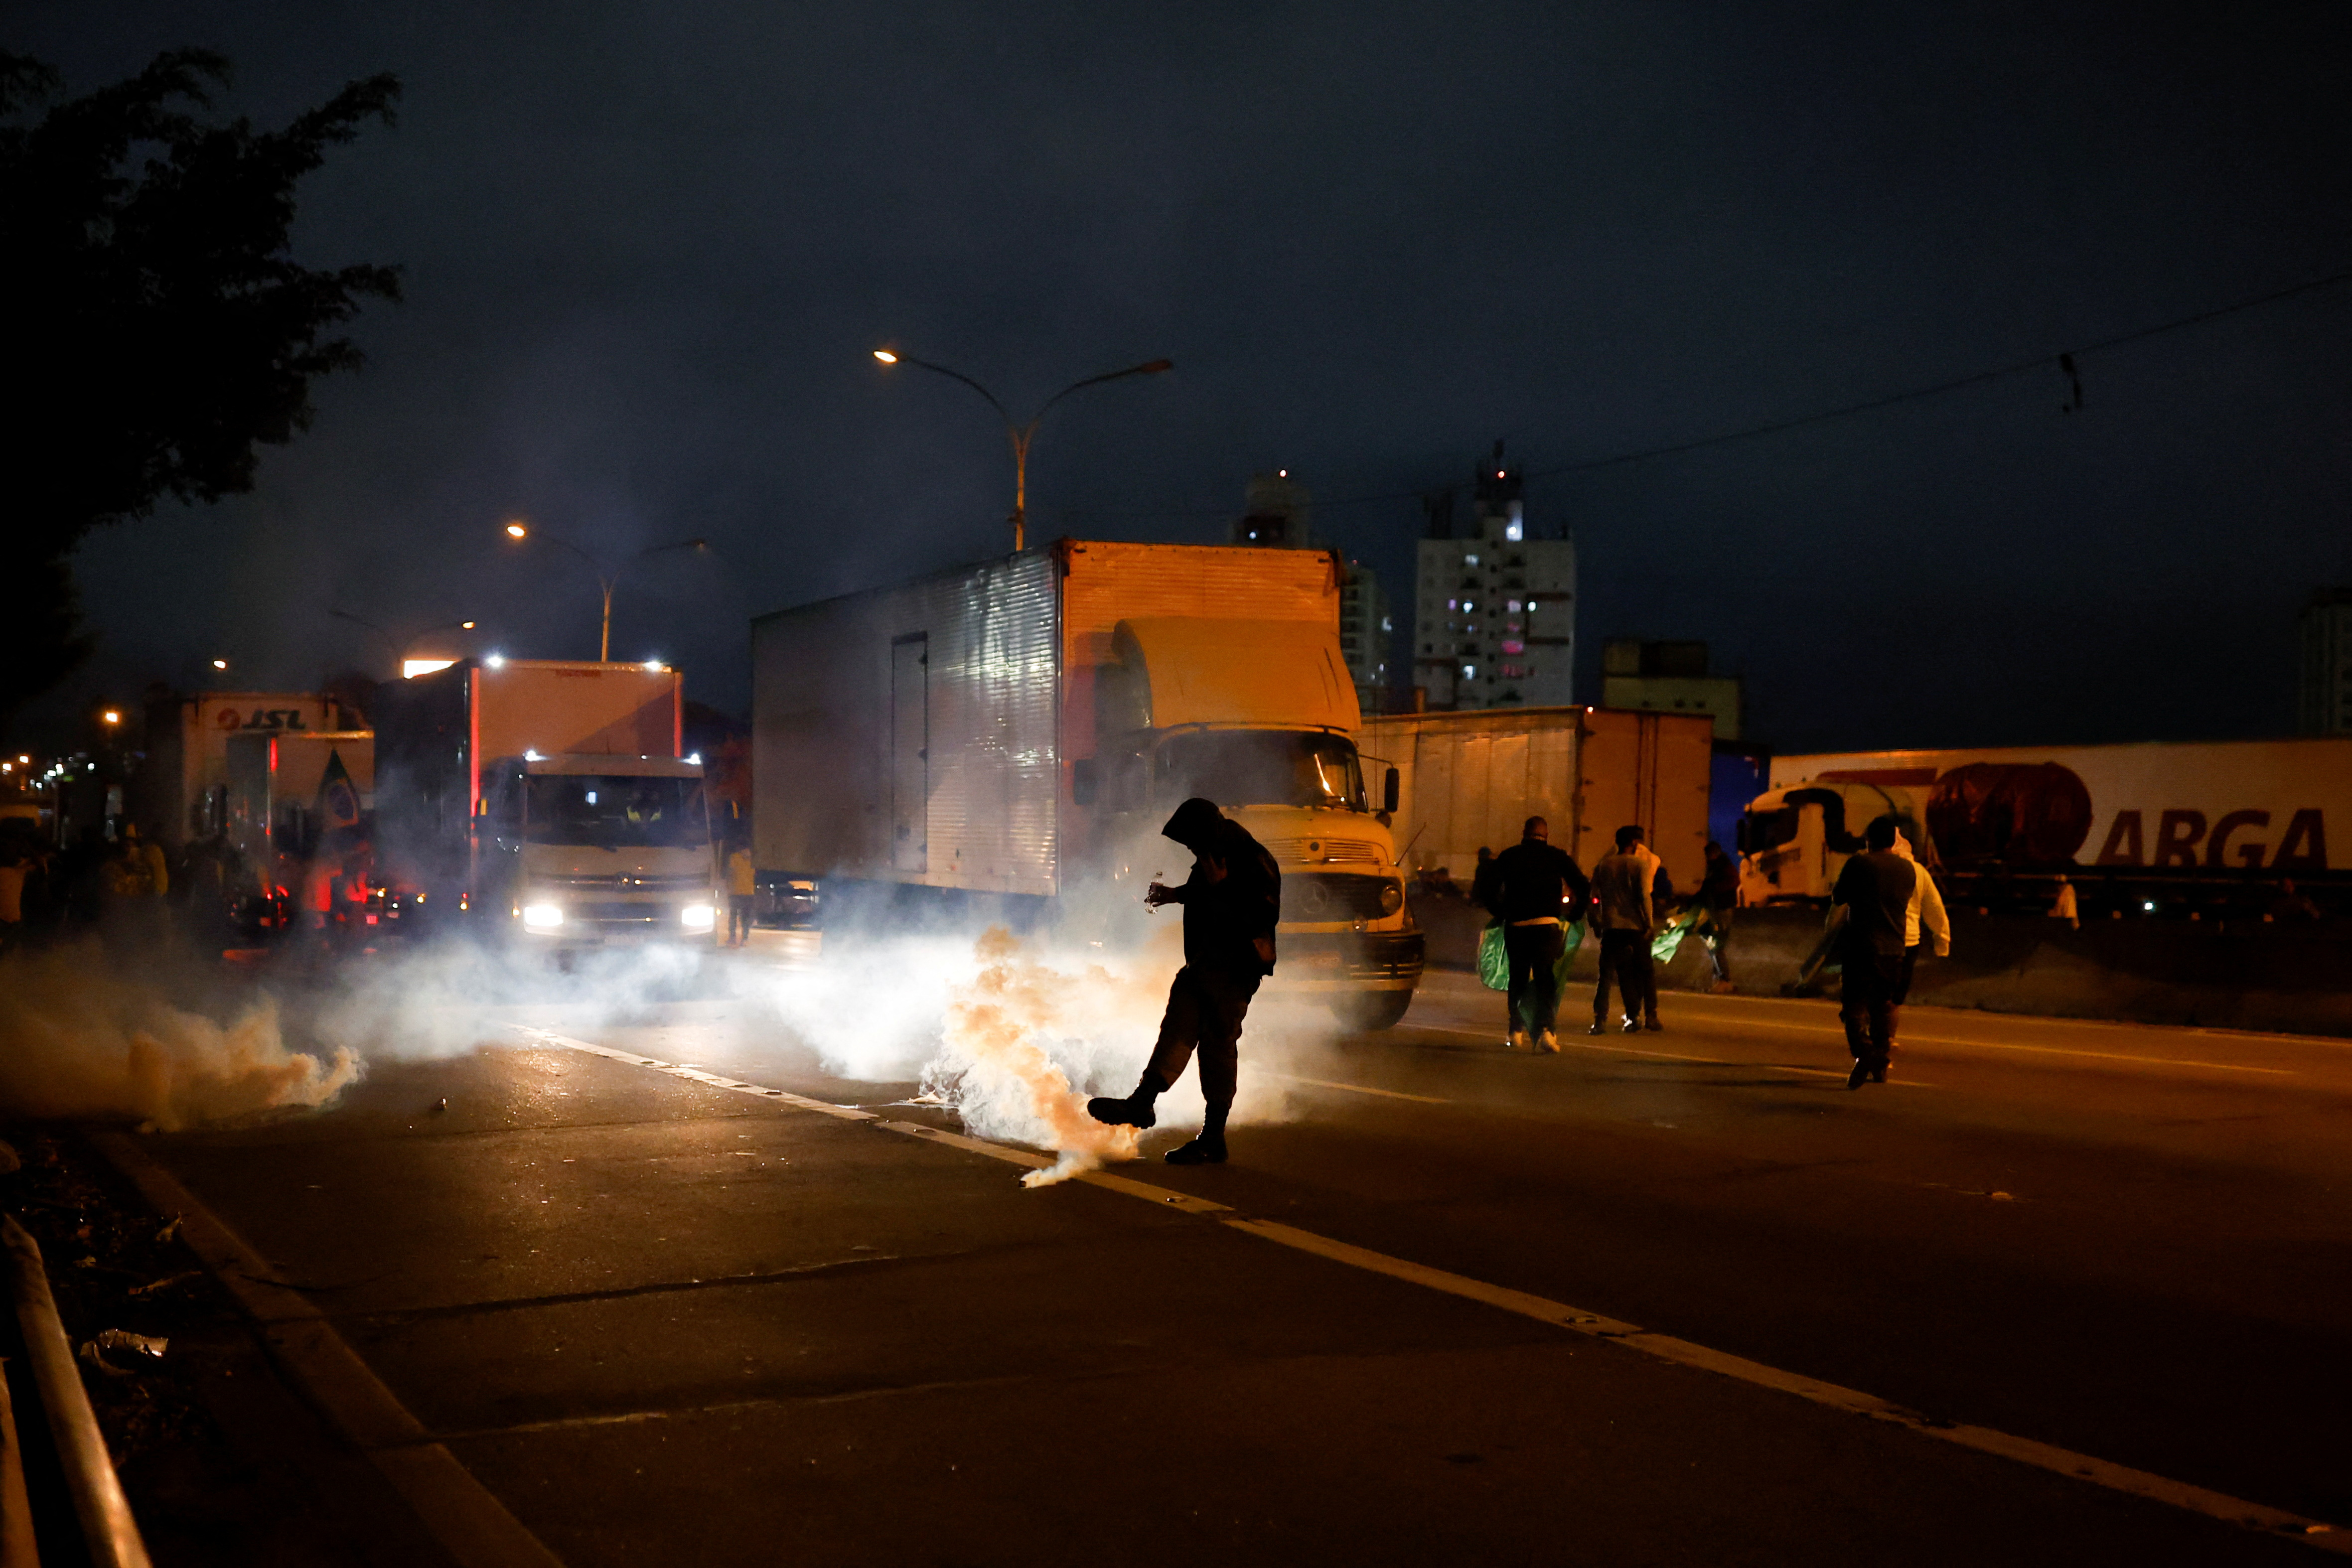 Protests continued through the night with clashes with police in different parts of Brazil (Reuters/Amanda Perubelli)